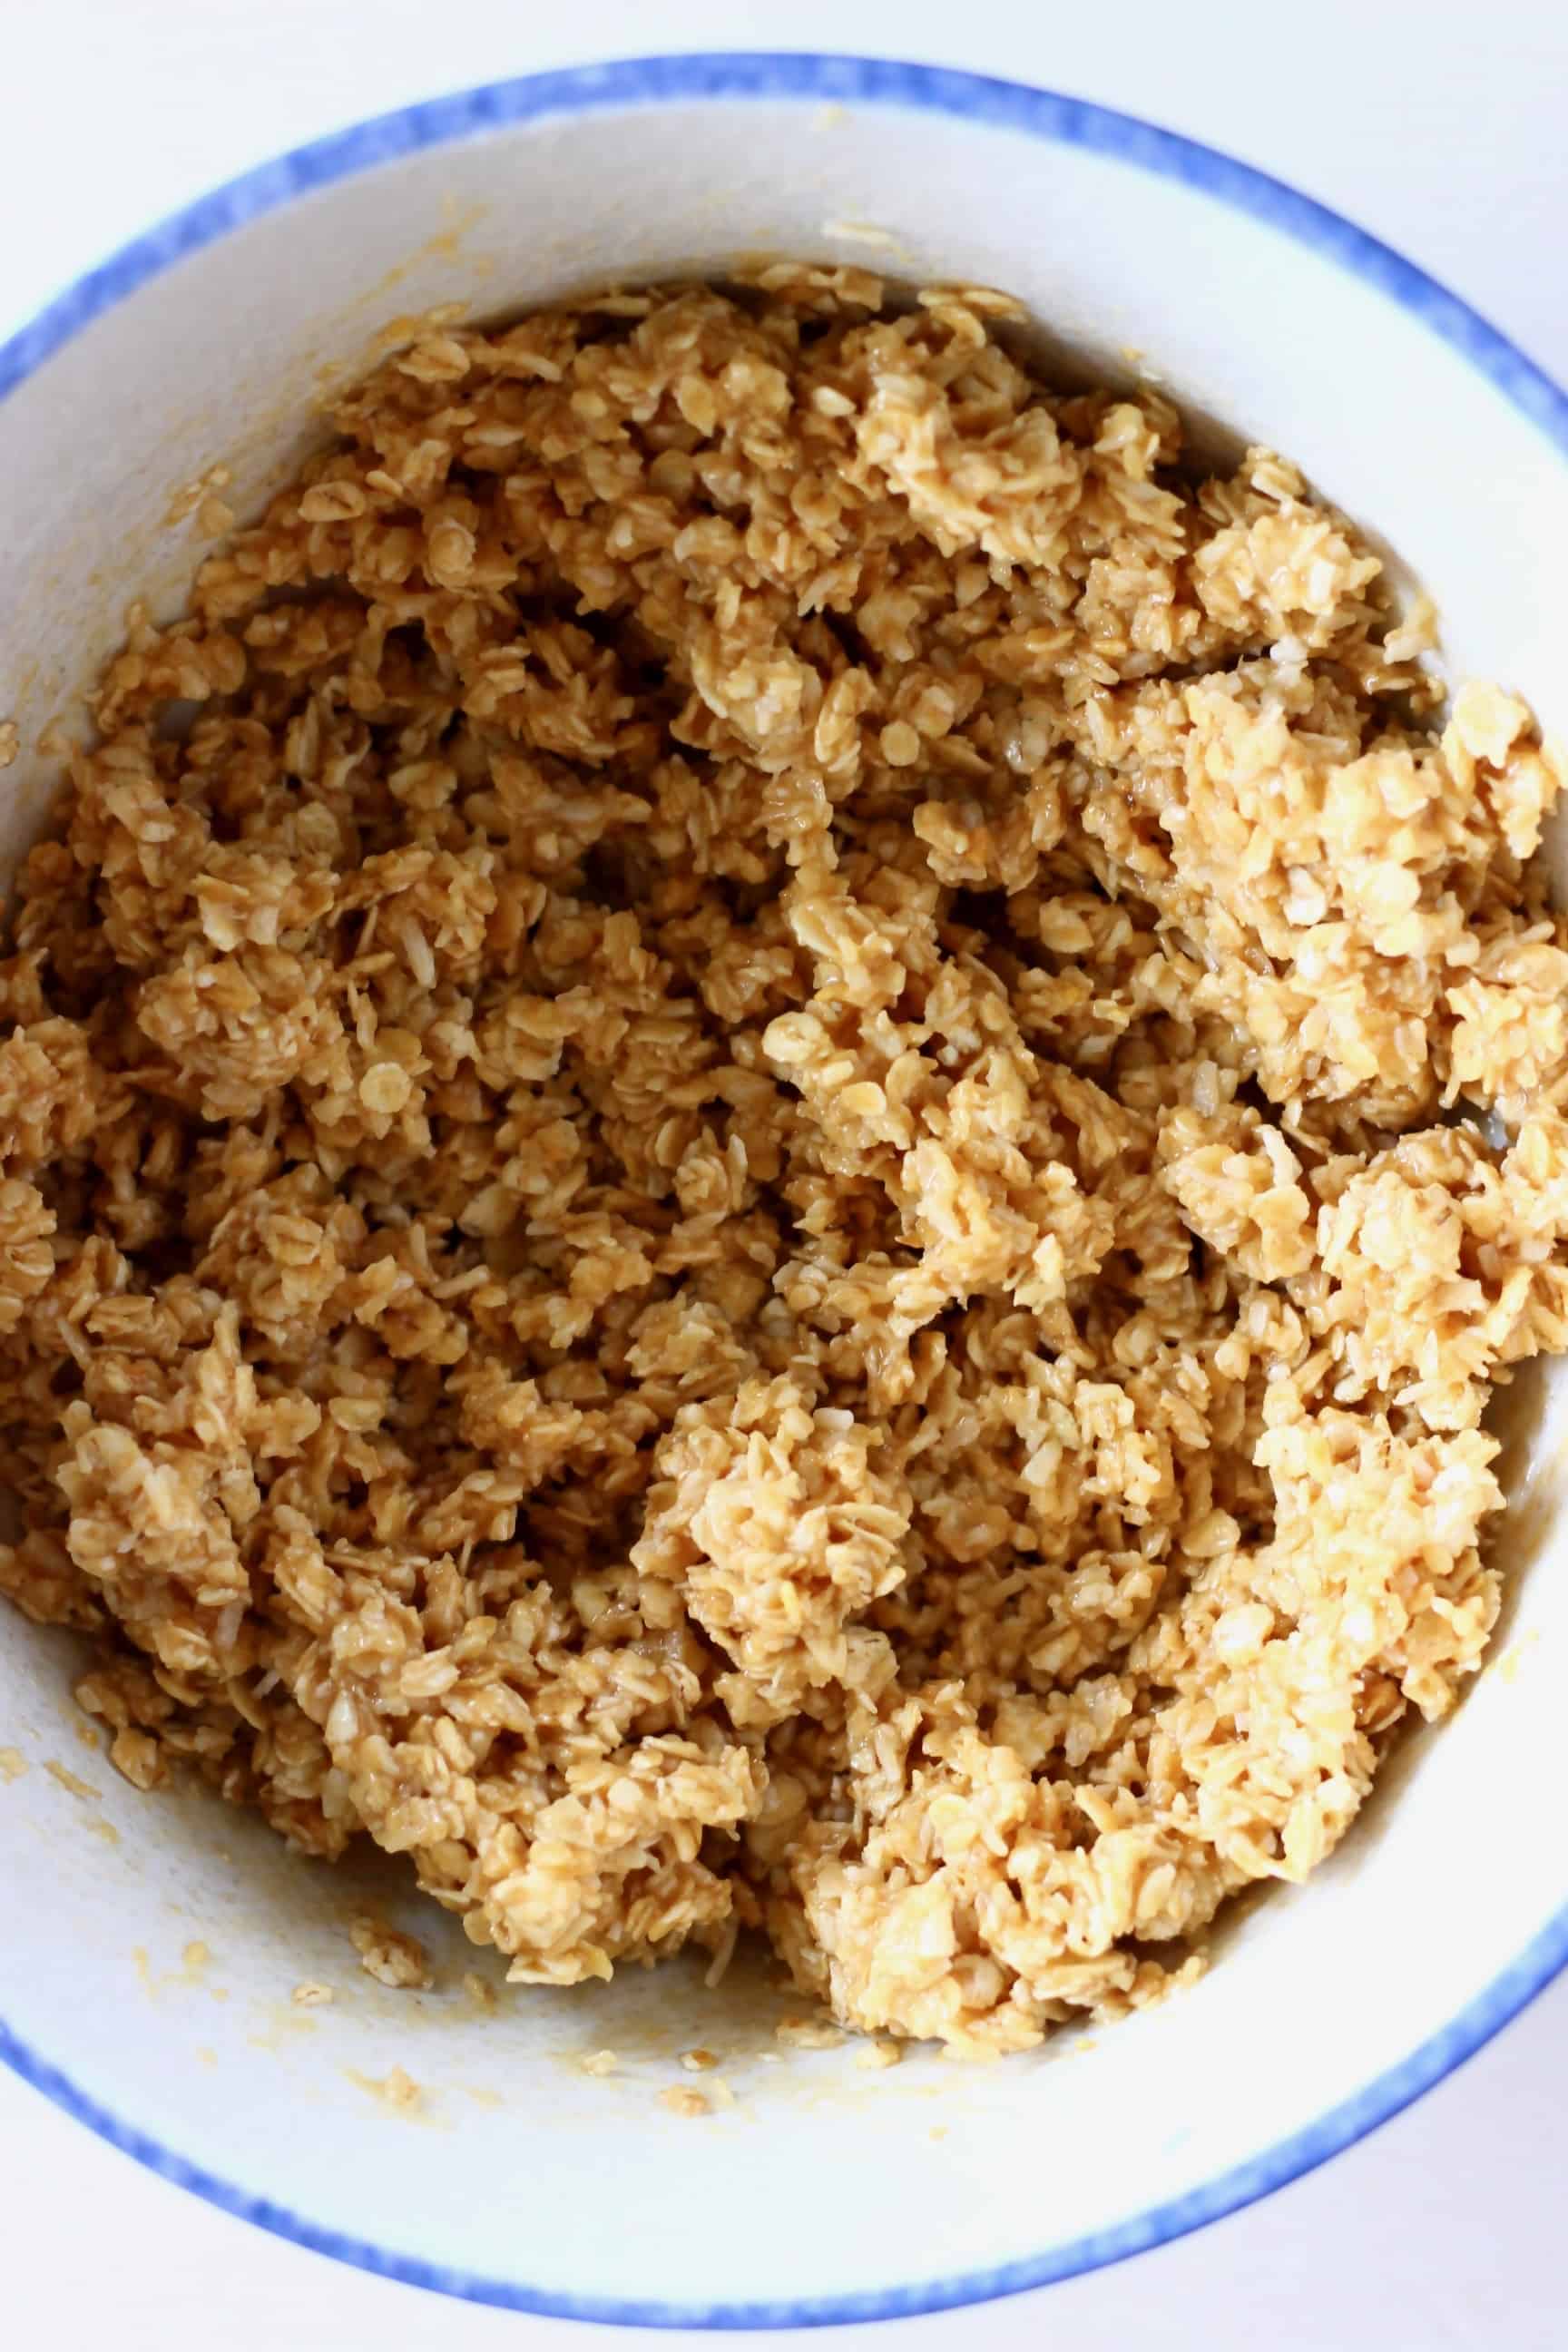 No-bake energy bites mixture with oats, peanut butter and agave syrup in a bowl